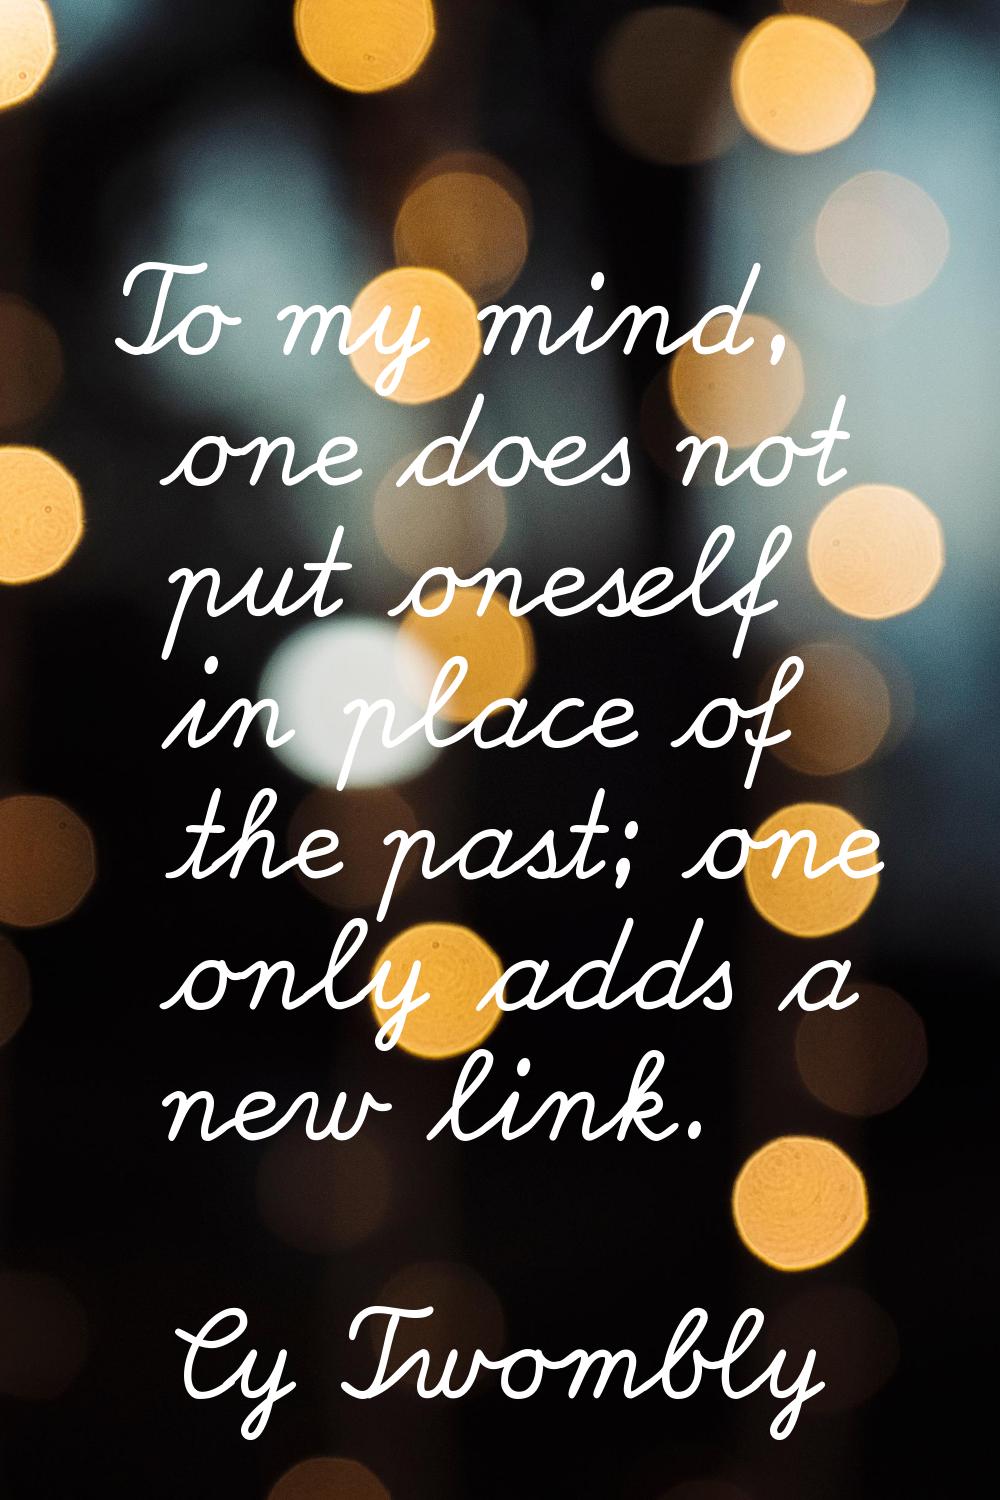 To my mind, one does not put oneself in place of the past; one only adds a new link.